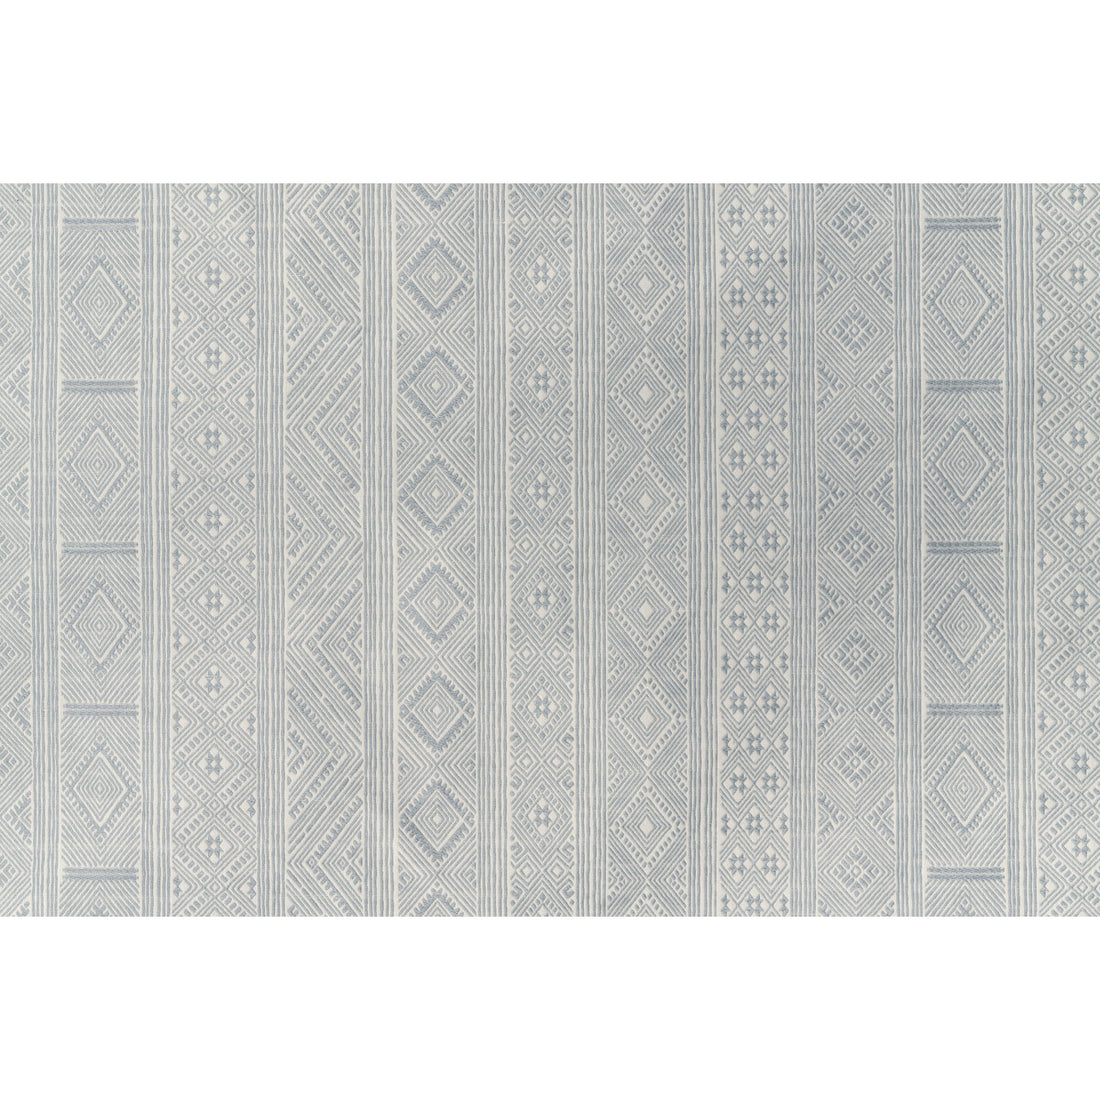 Halsey fabric in silver color - pattern BFC-3663.11.0 - by Lee Jofa in the Blithfield collection